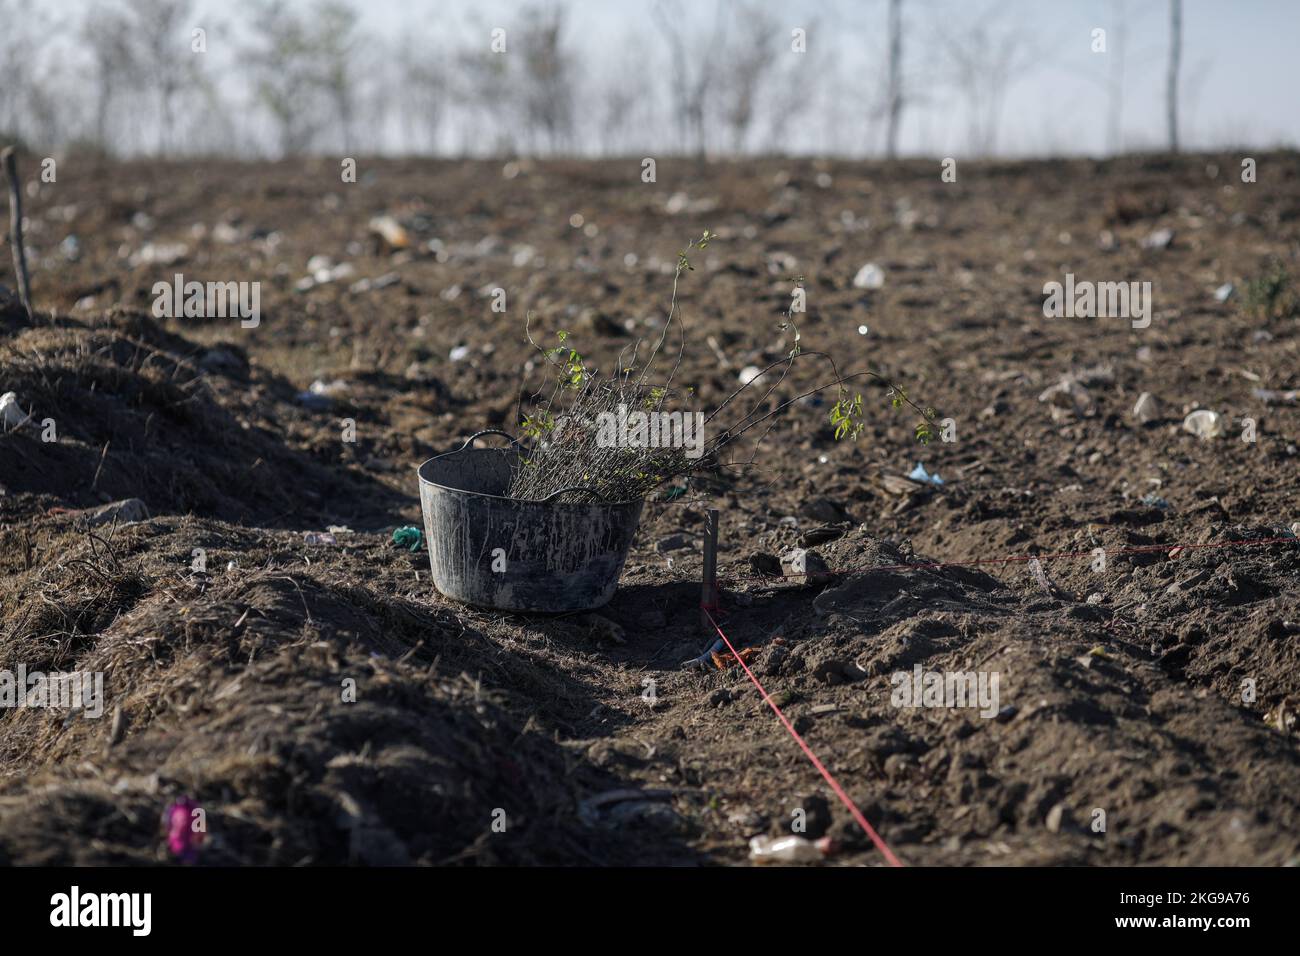 Details with a bucket full of tree sapling during a tree planting activity on a garbage soiled field. Stock Photo